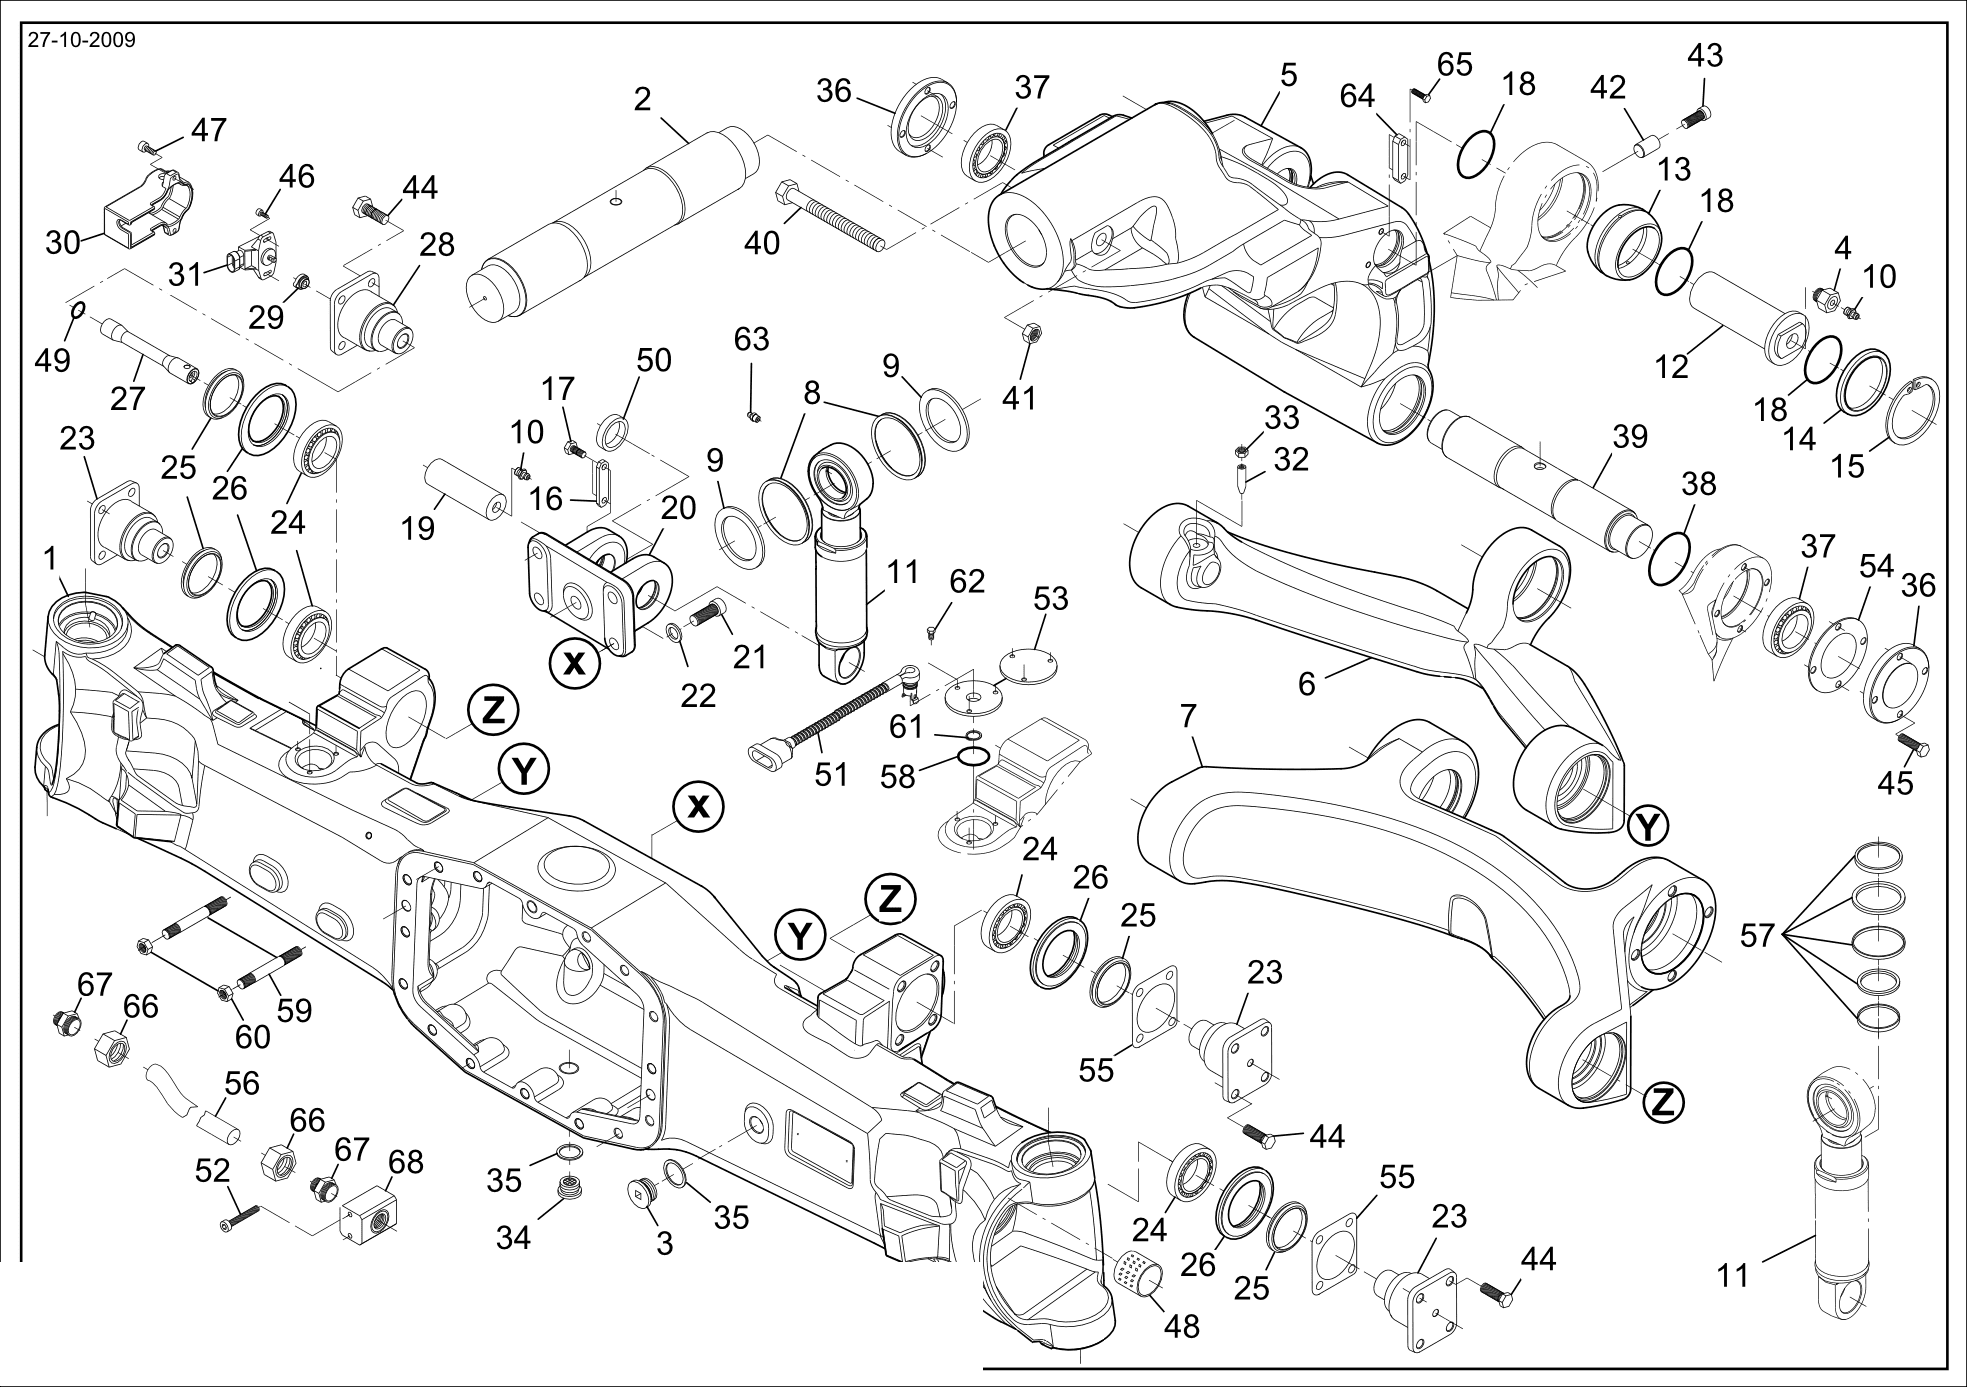 drawing for CNH NEW HOLLAND 87611462 - BOLT (figure 2)